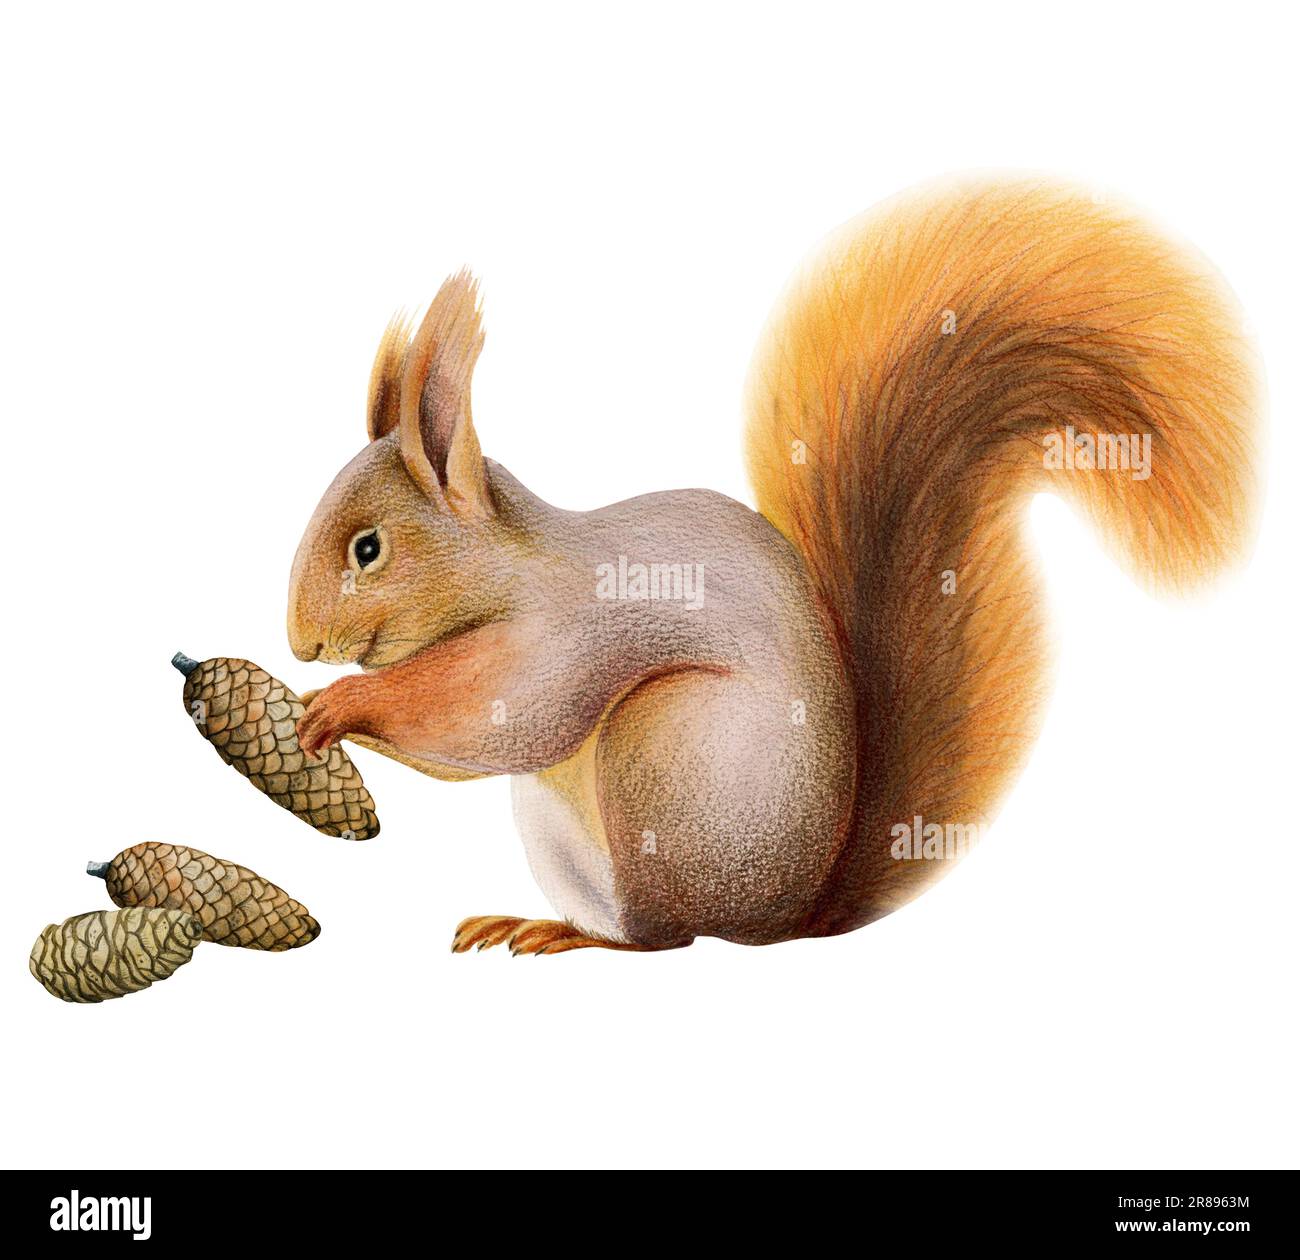 Cute furry orange squirrel holding pine cone watercolor illustration isolated on white for woodland forest designs Stock Photo